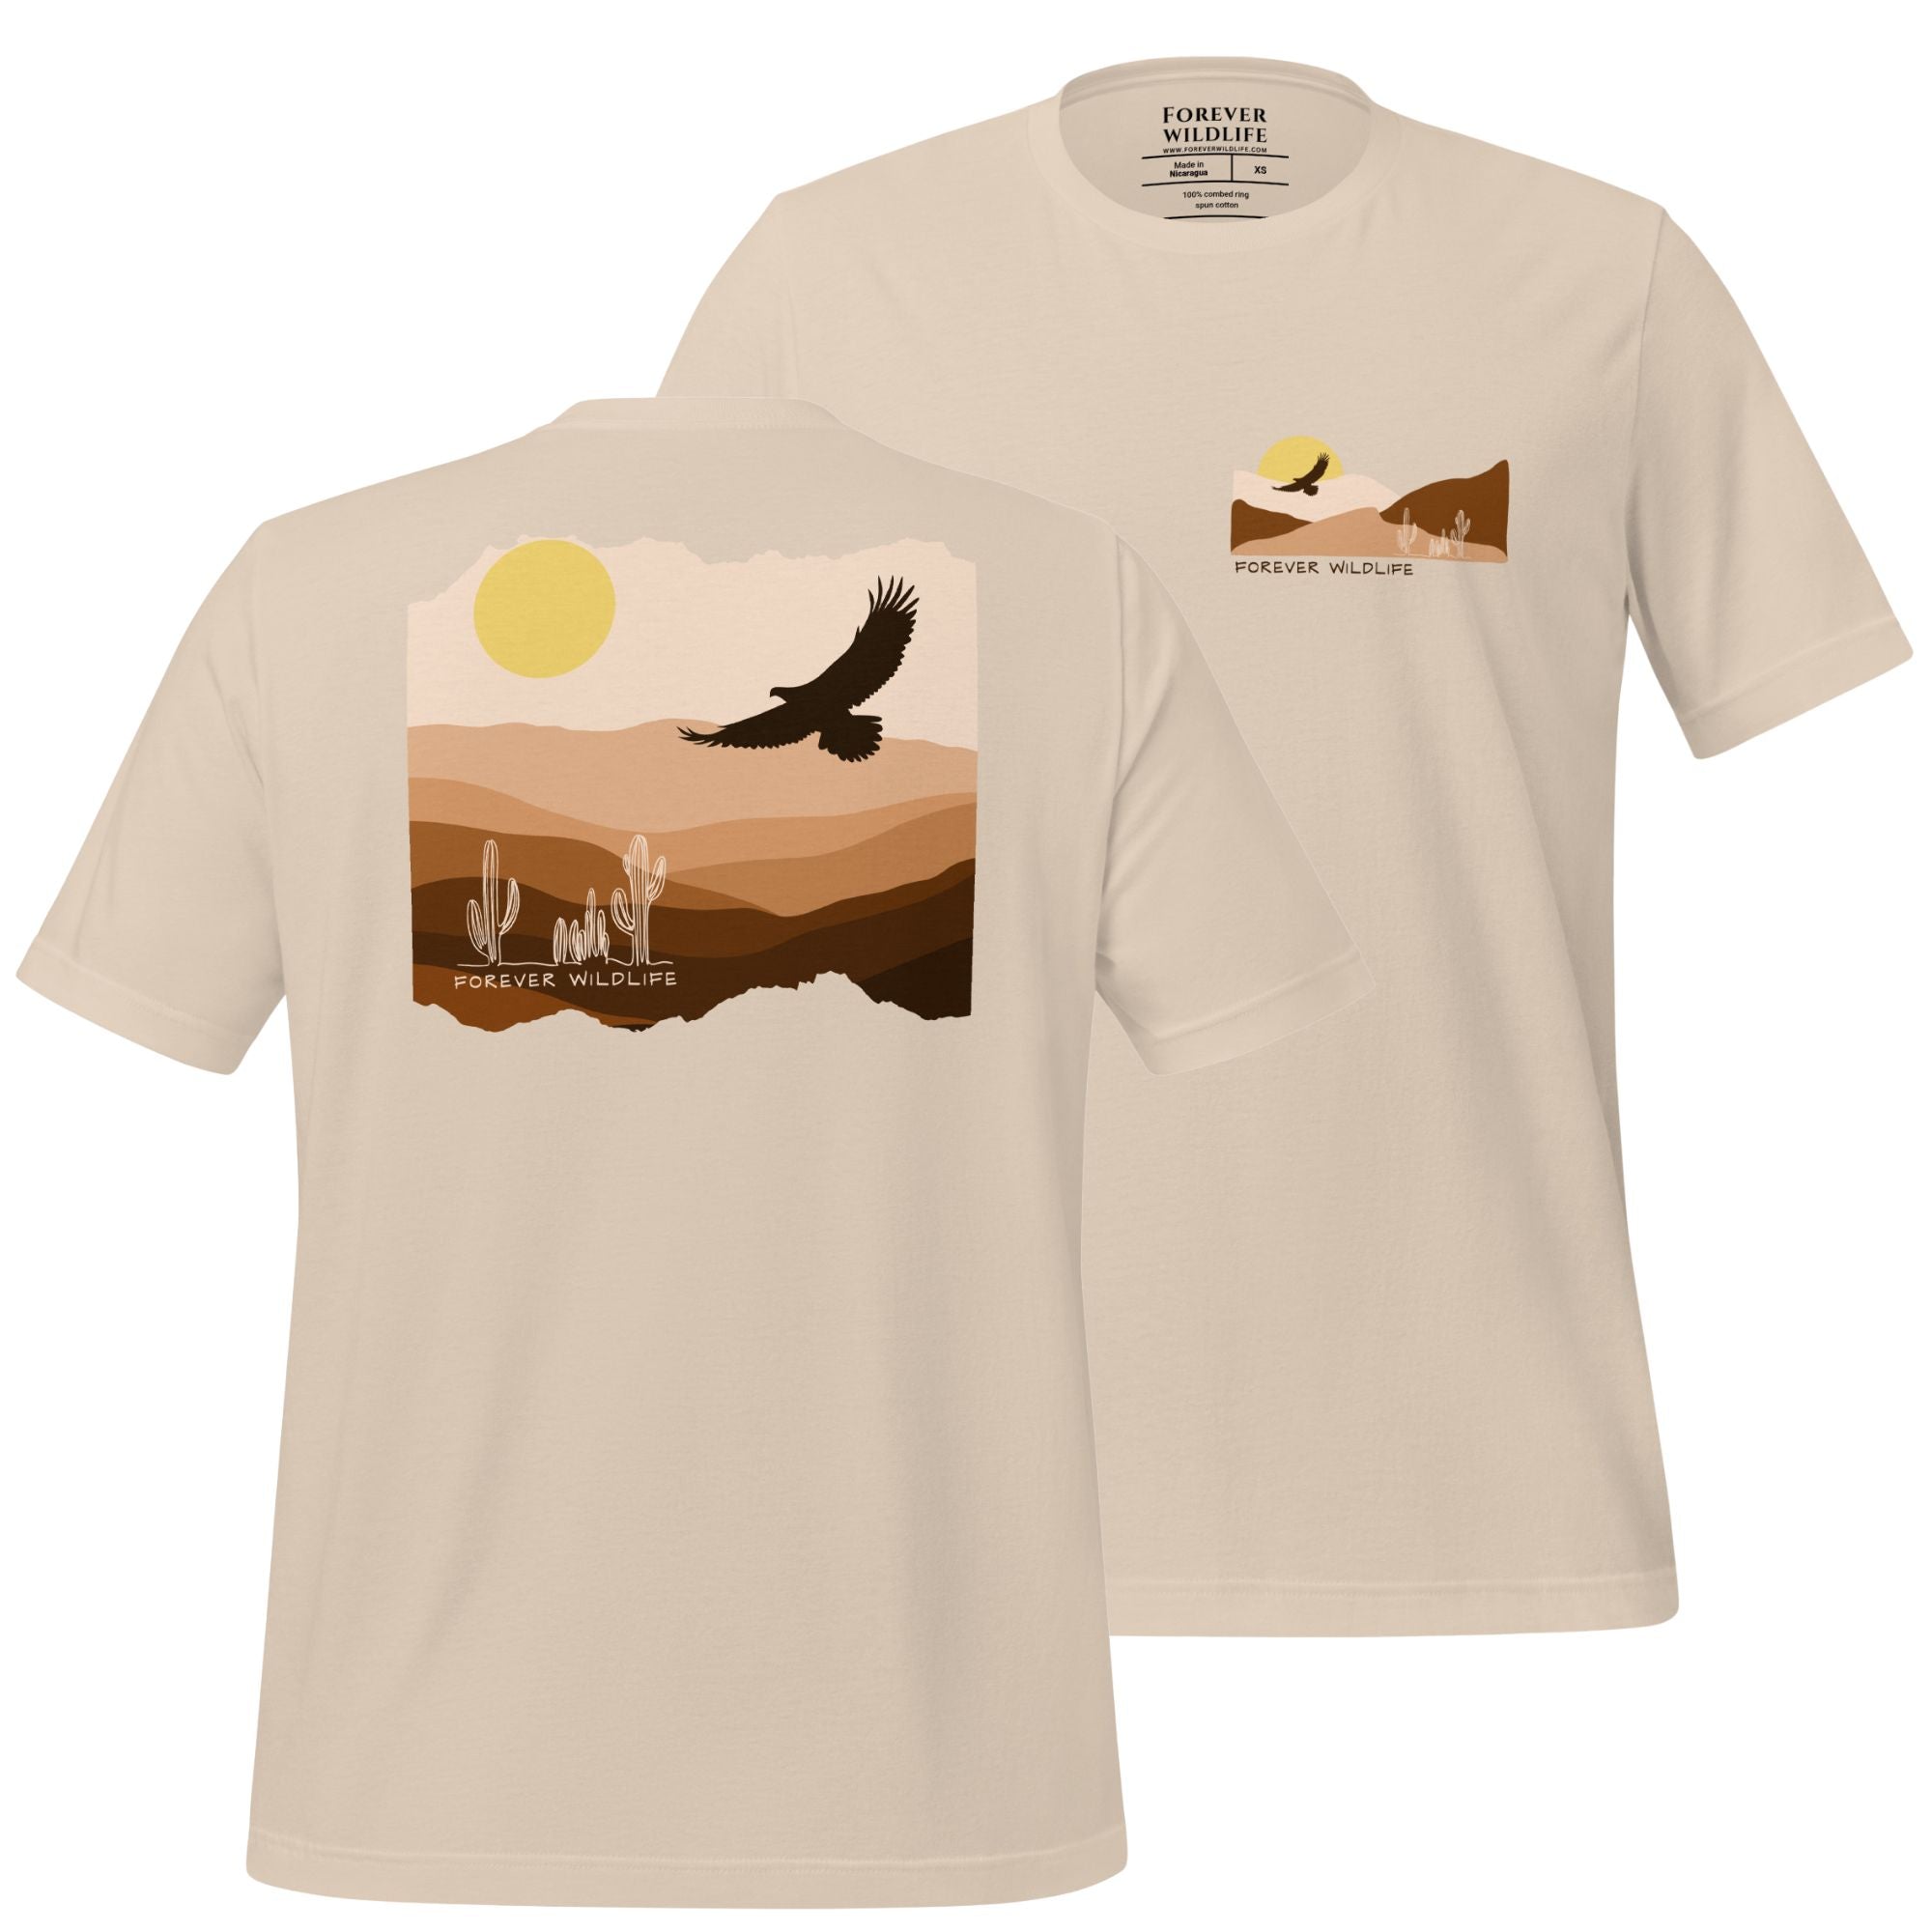  Eagle T-shirt, beautiful Soft Cream Eagle t-shirt with eagle soaring over the desert part of Wildlife tshirts & Clothing collection.